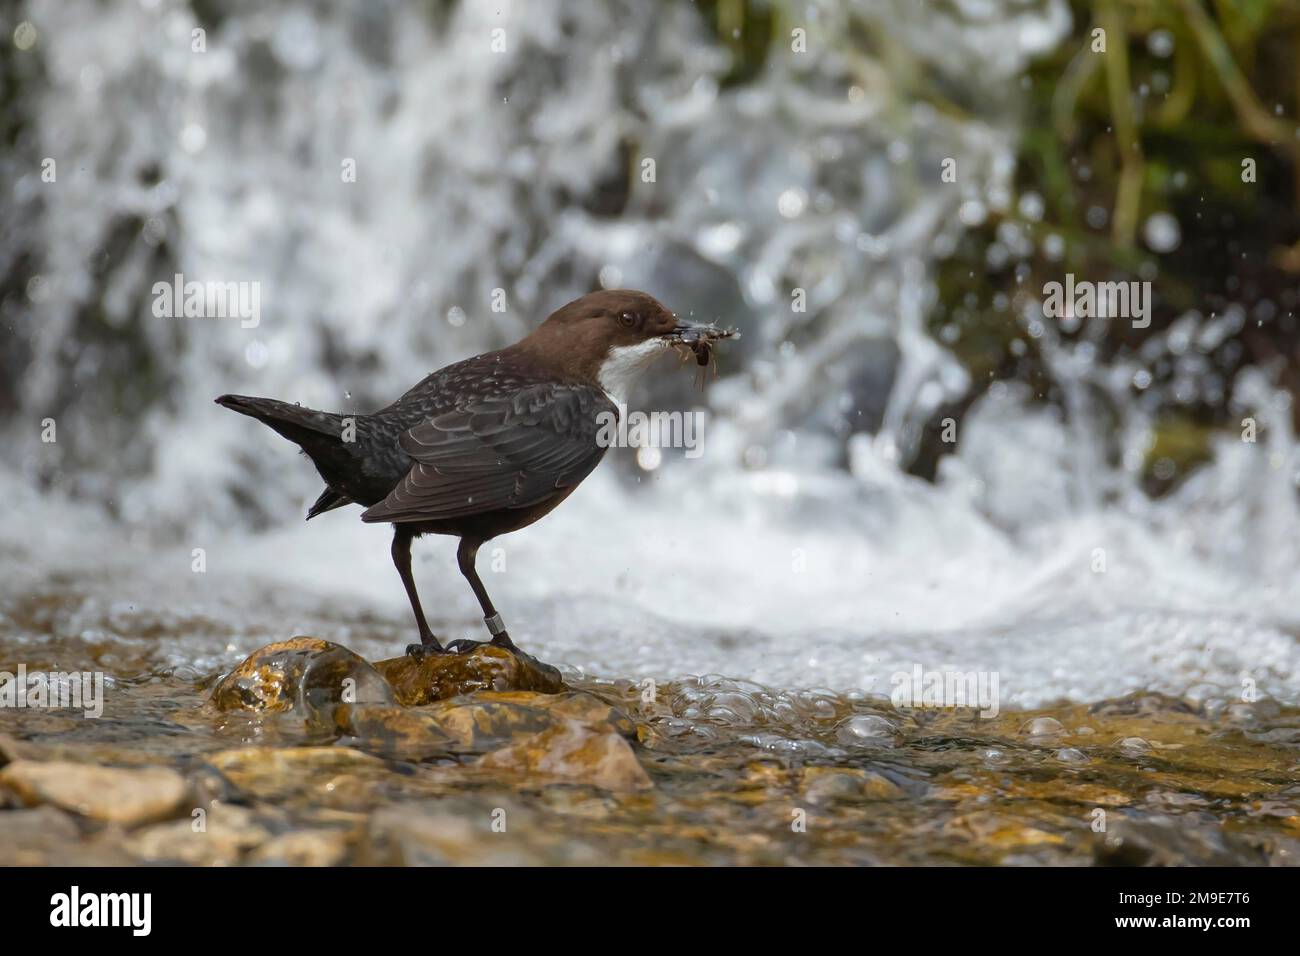 White throated dipper (Cinclus Cinclus) adult bird carrying food in its beak in a river, Derbyshire, England, United Kingdom Stock Photo